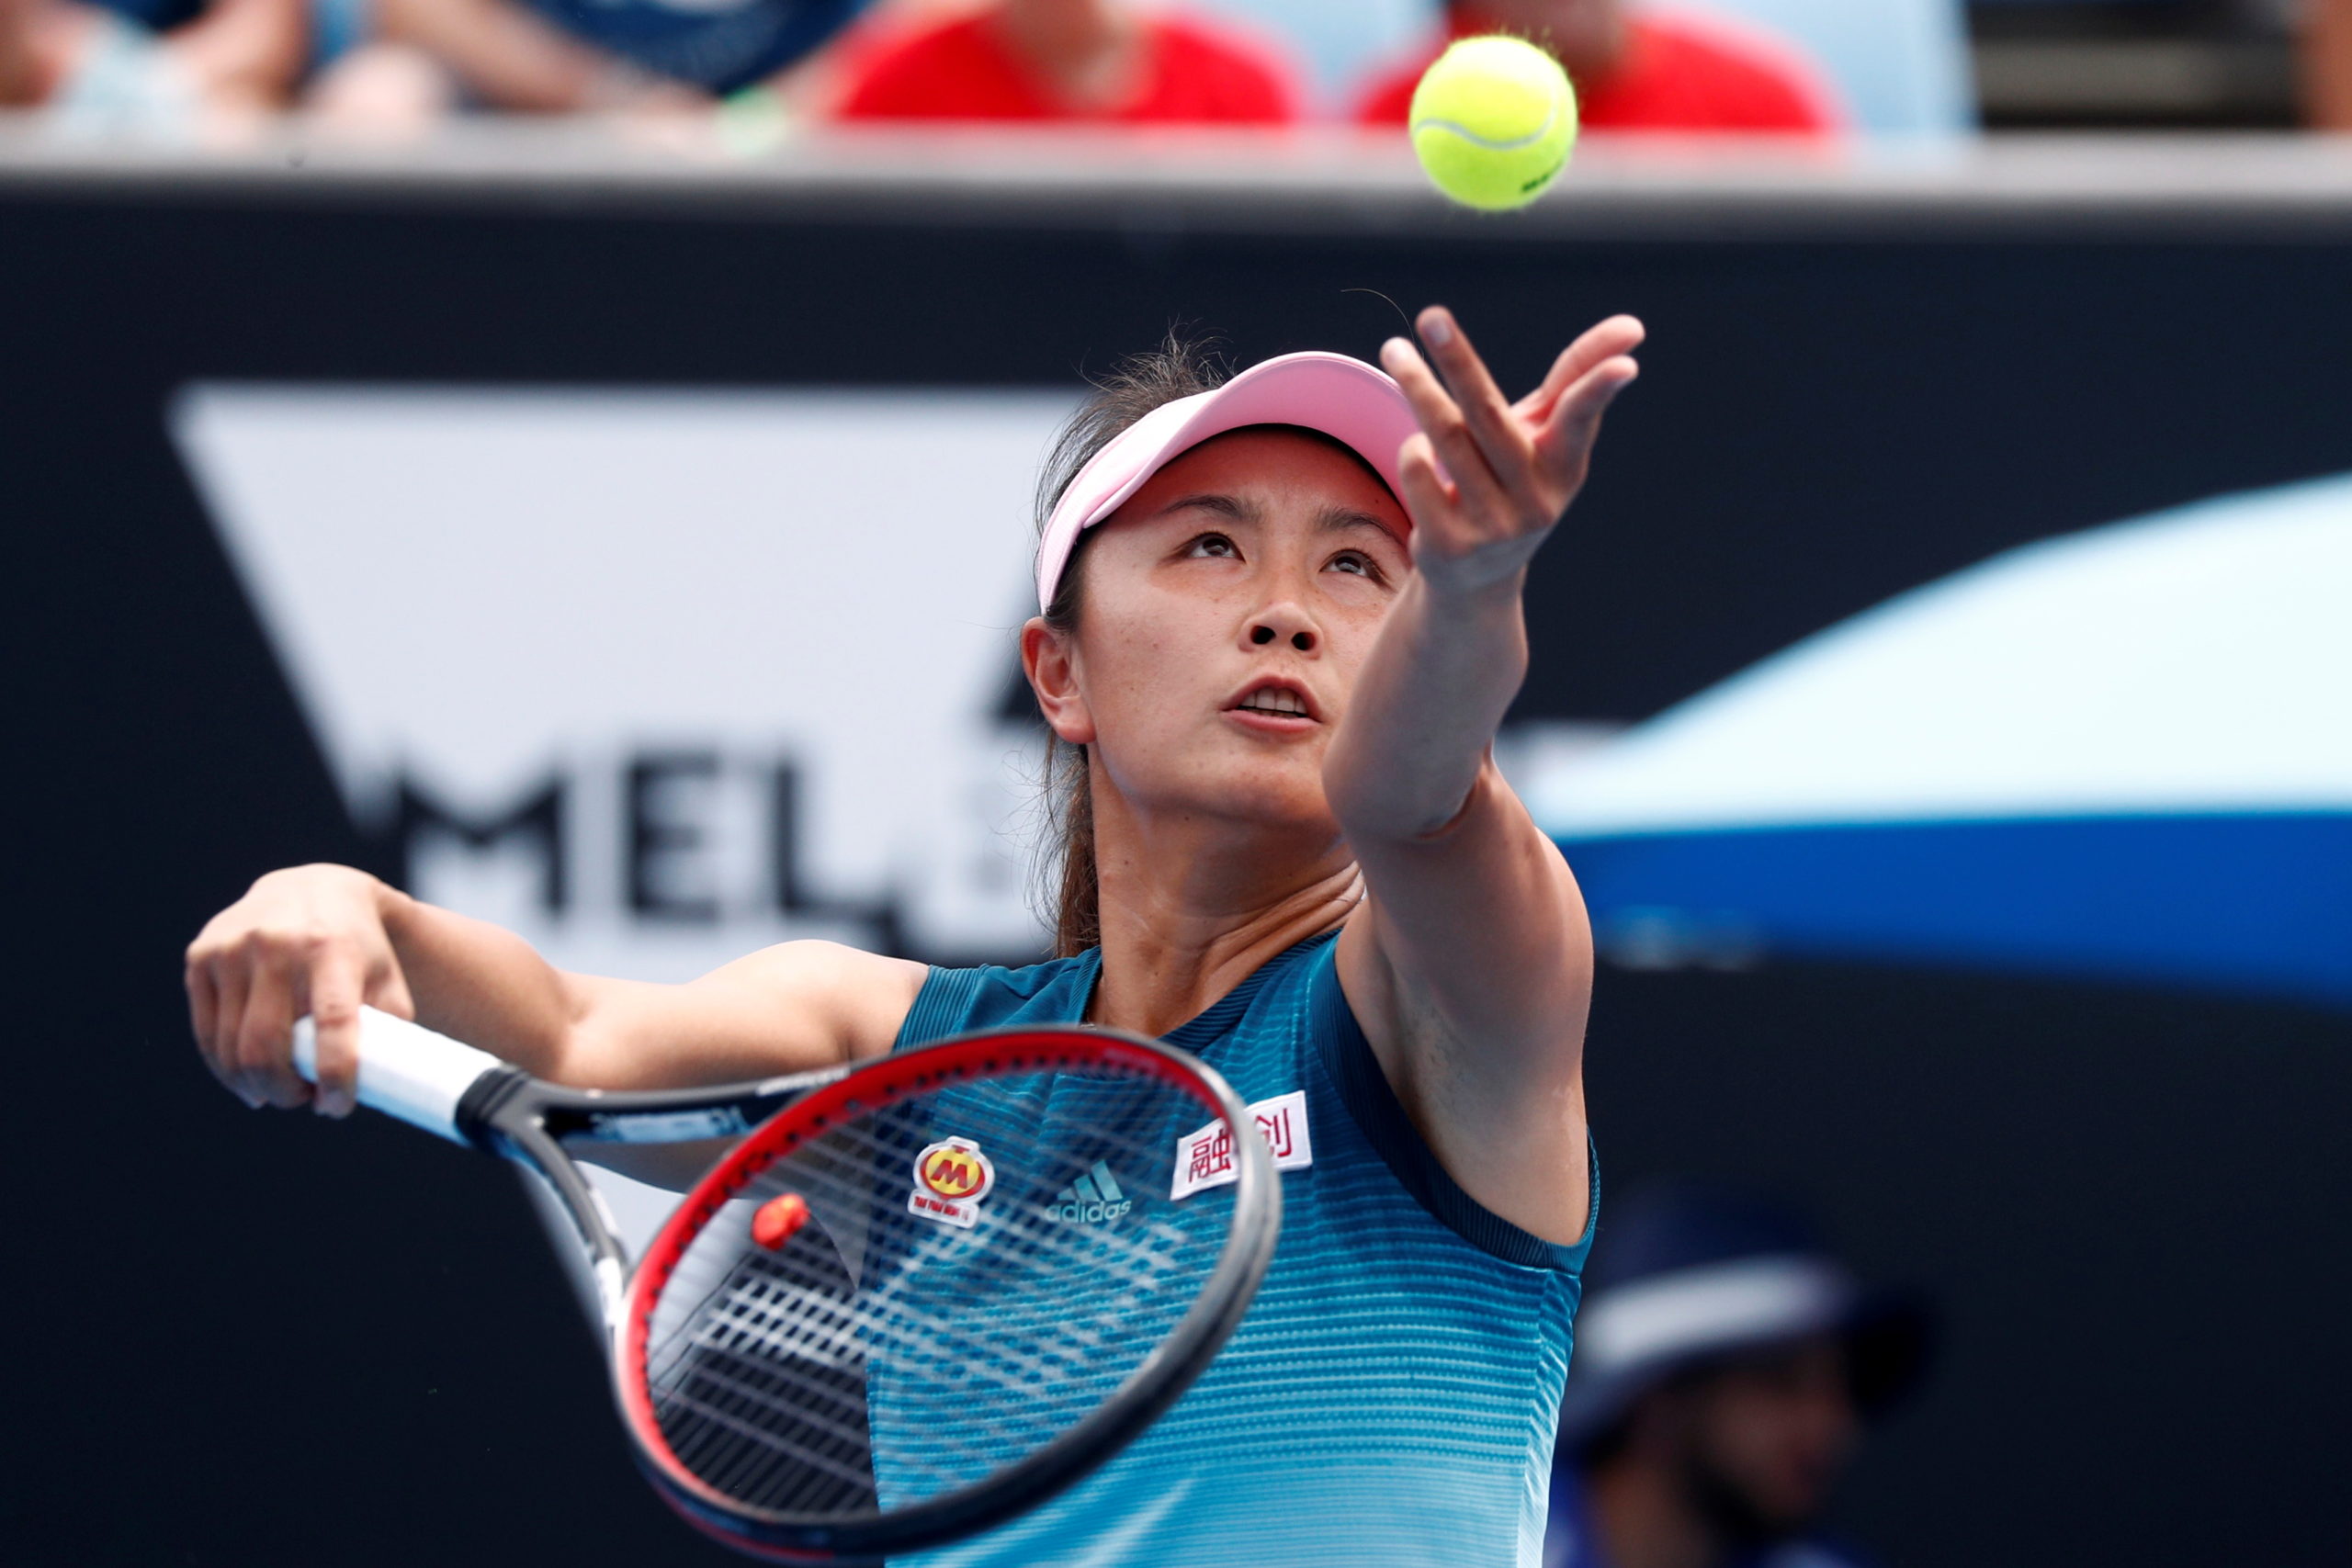  A file photo of China’s Peng Shuai serving during a match at the Australian Open on January 15, 2019.